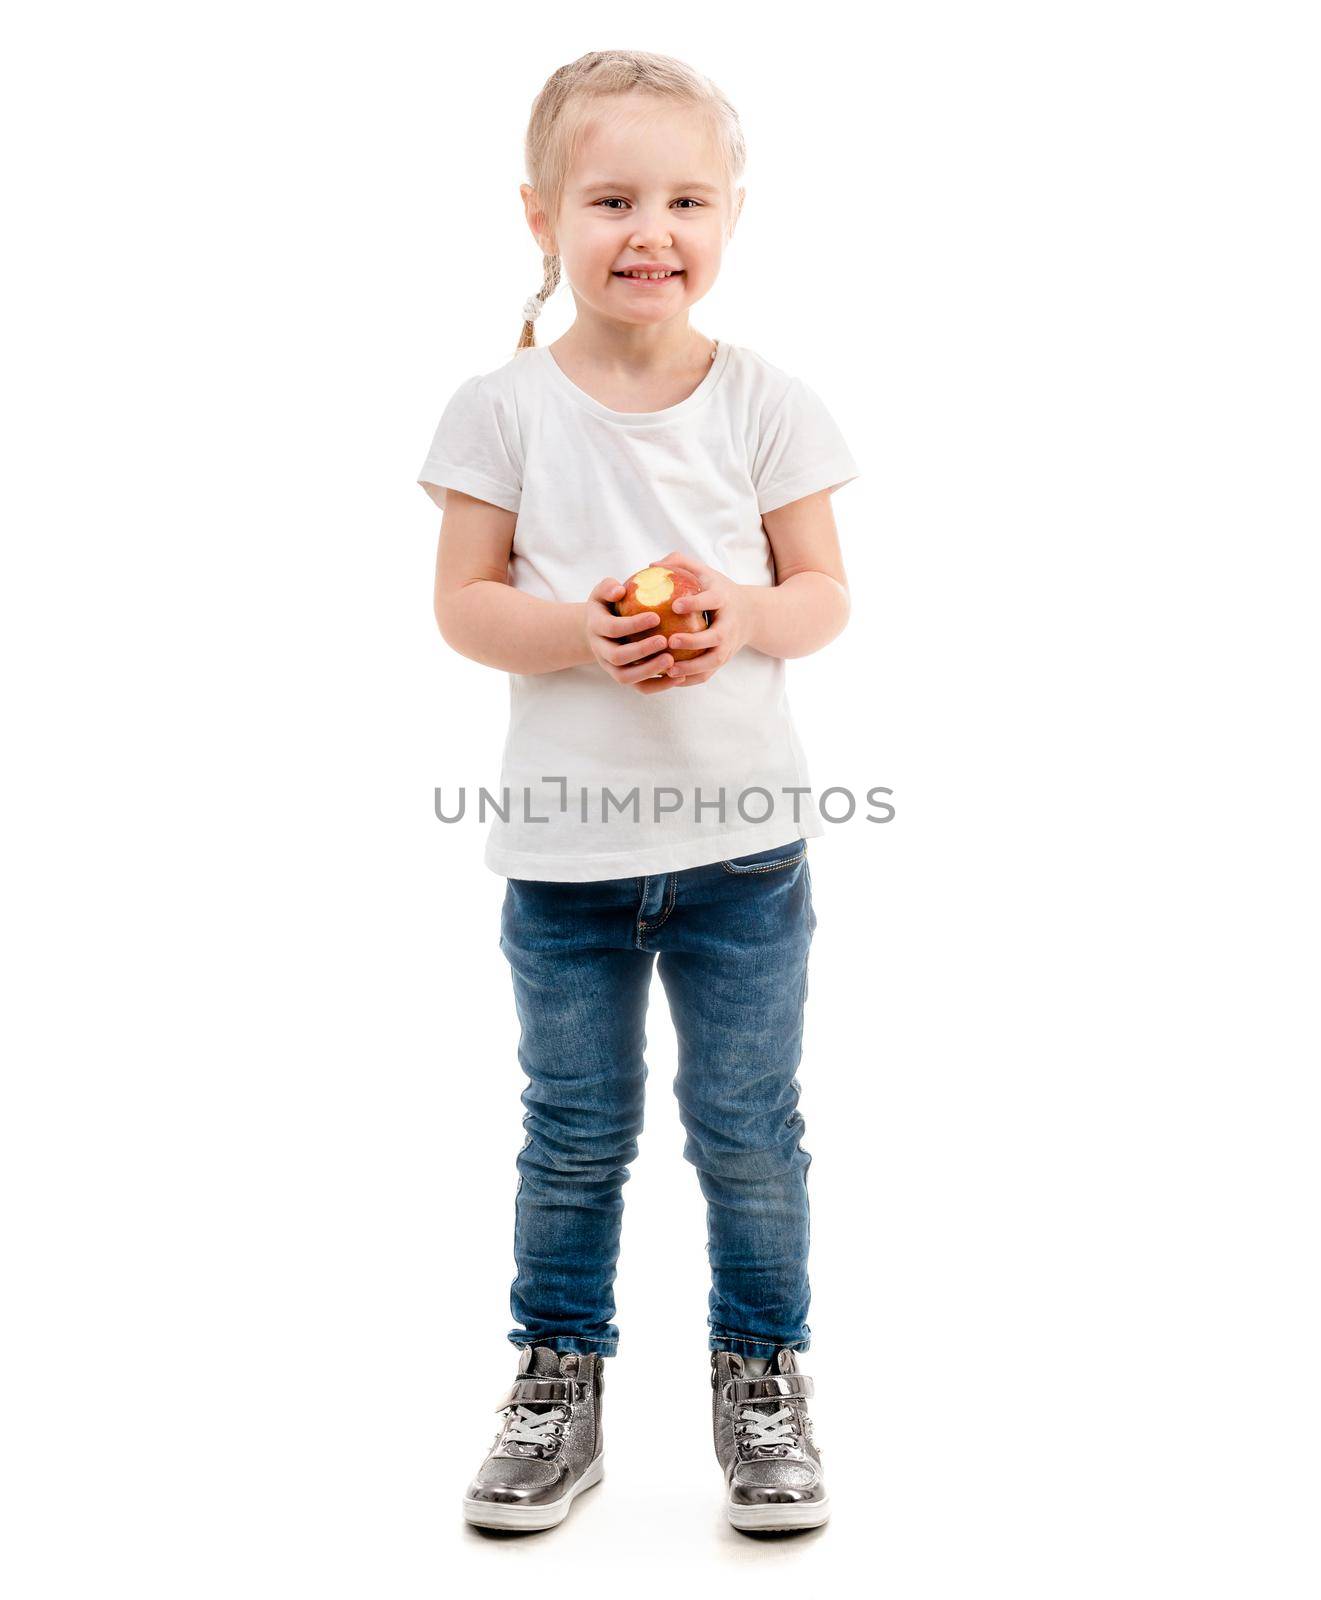 Amazing girl with nice smile holding an apple, isolated on white background